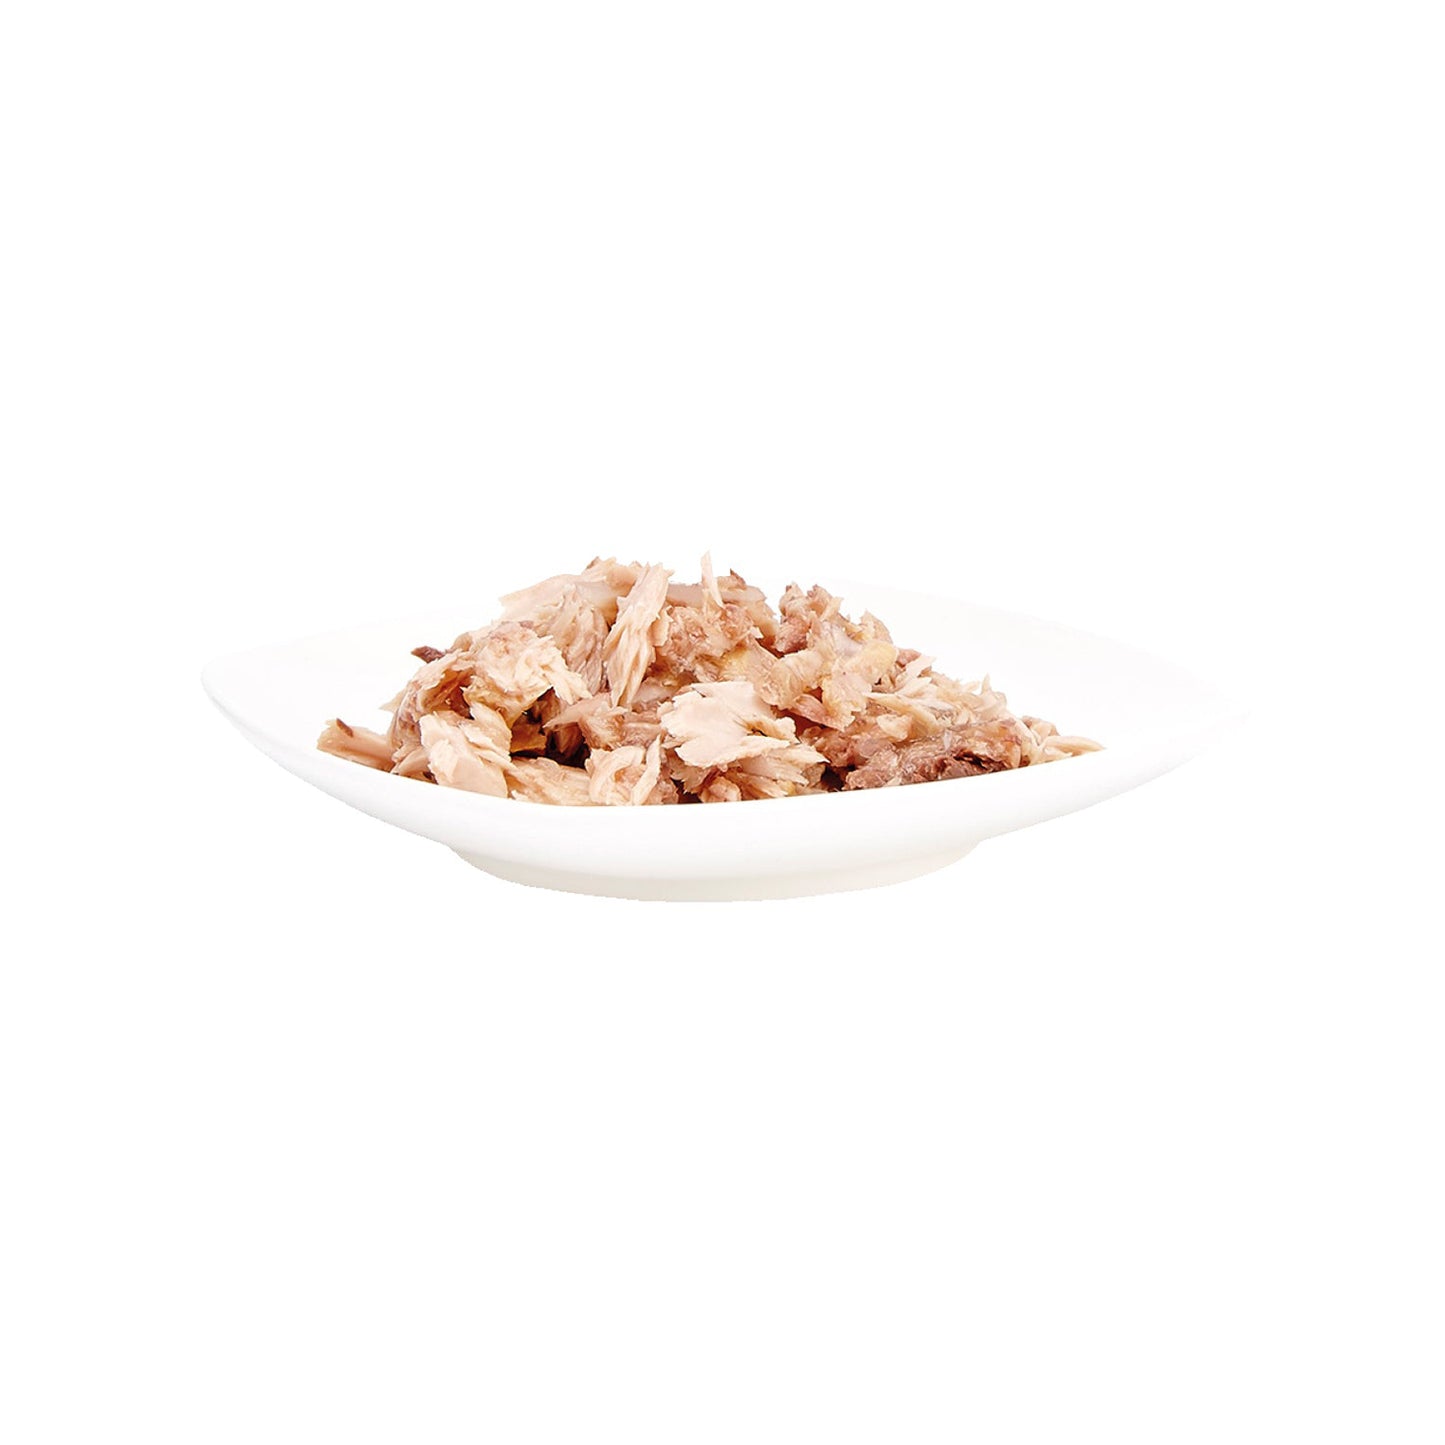 Applaws - Cat Pouch Tuna Whole Meat with Salmon in Soft Jelly